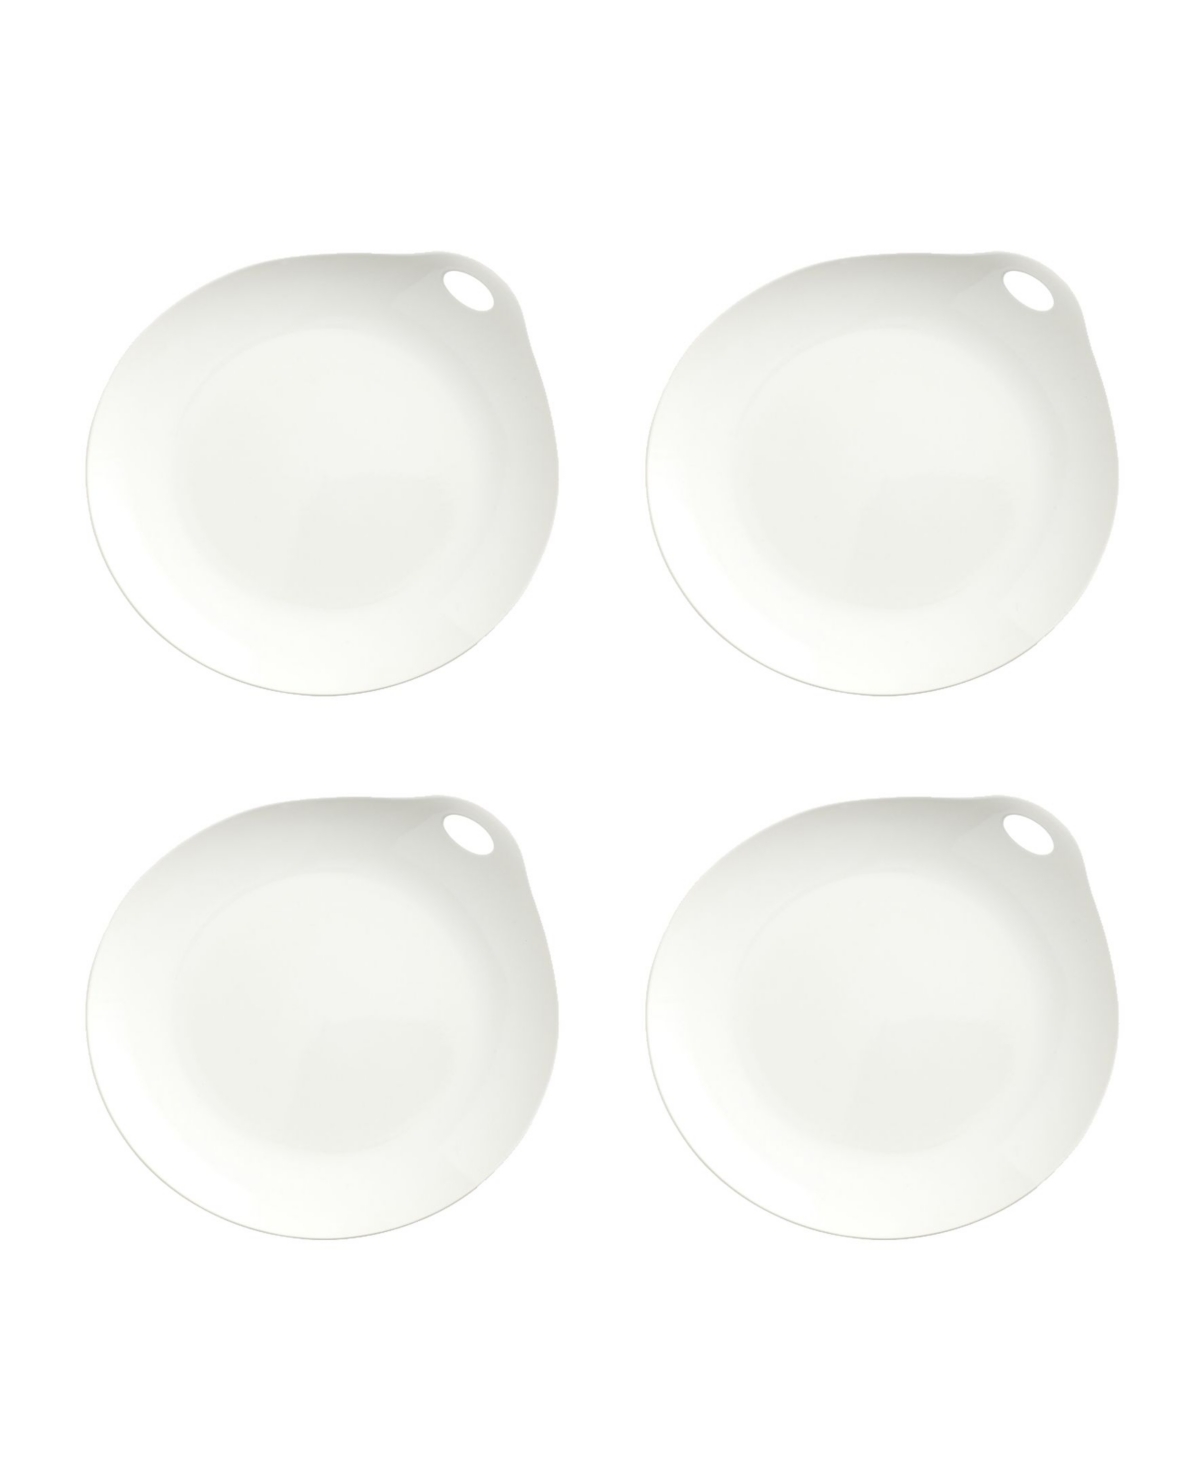 Portables 4 Piece Dinner Plates, Service for 4 - White